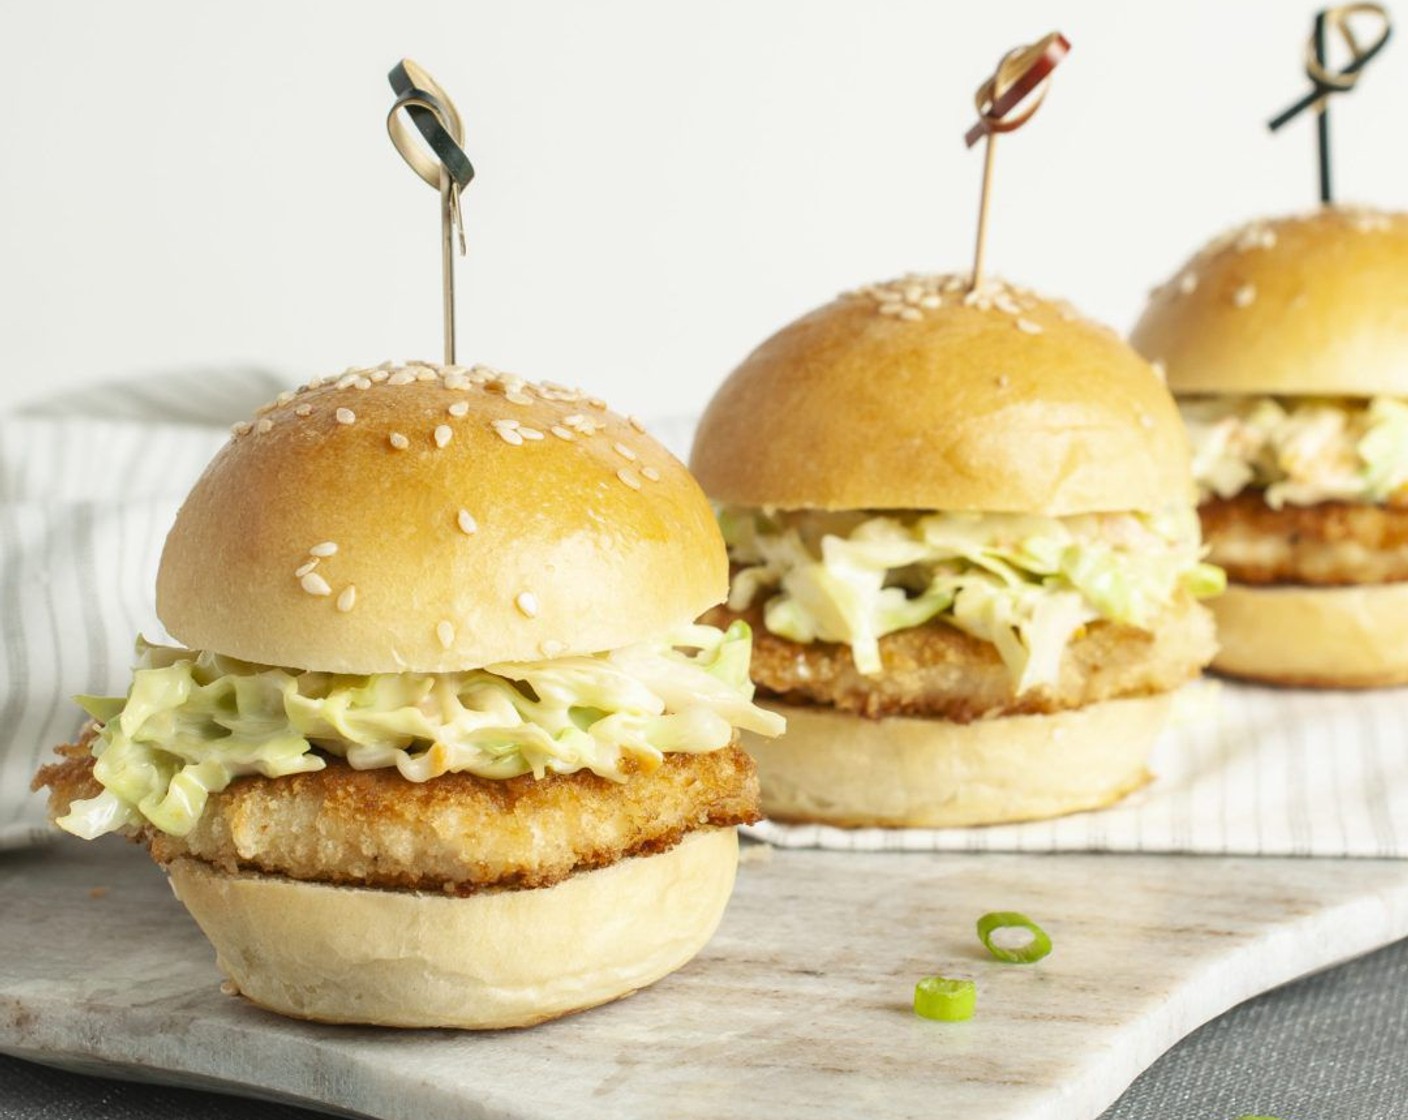 step 9 To each slider bun, add a chicken cutlet and top with a generous amount of wasabi slaw. Secure each slider with a long toothpick if desired and serve immediately.